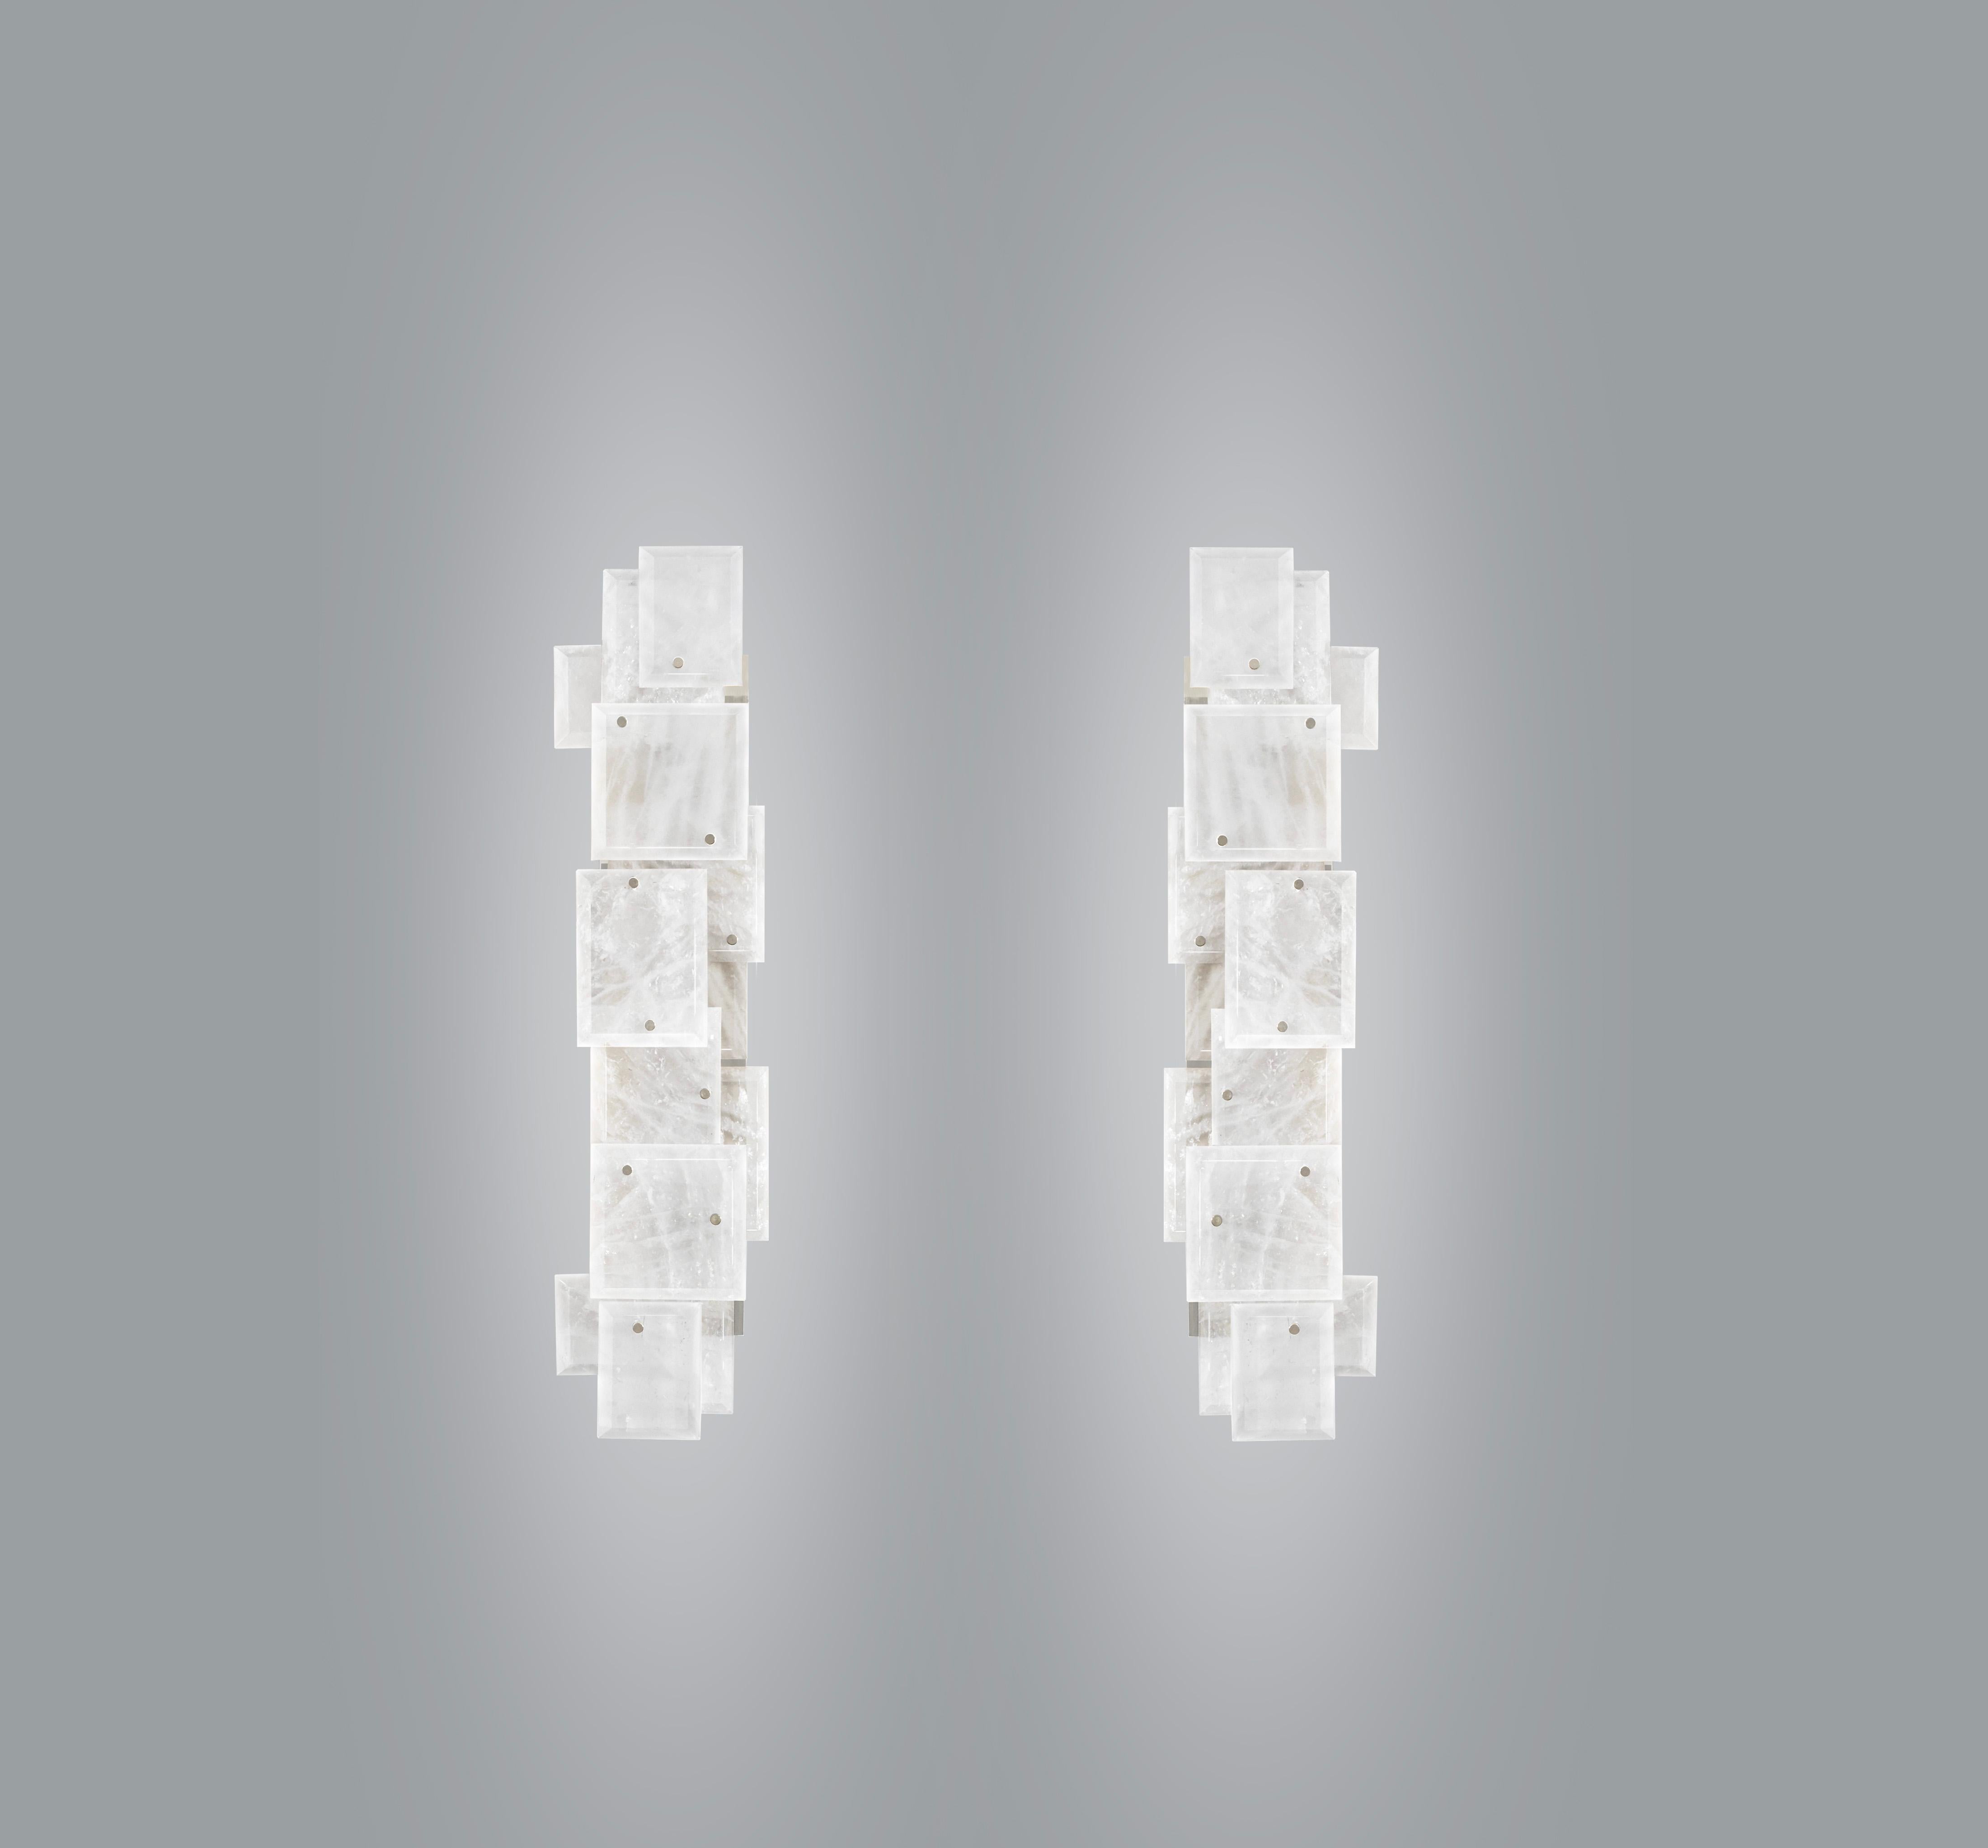 Pair of modern rock crystal quartz sconces with multiple panels decorations in matte nickel finish. Created by Phoenix Gallery.

Each sconce installed four sockets, use four 75 watts Led warm light bulbs, 300watts total. Light bulbs supplied.